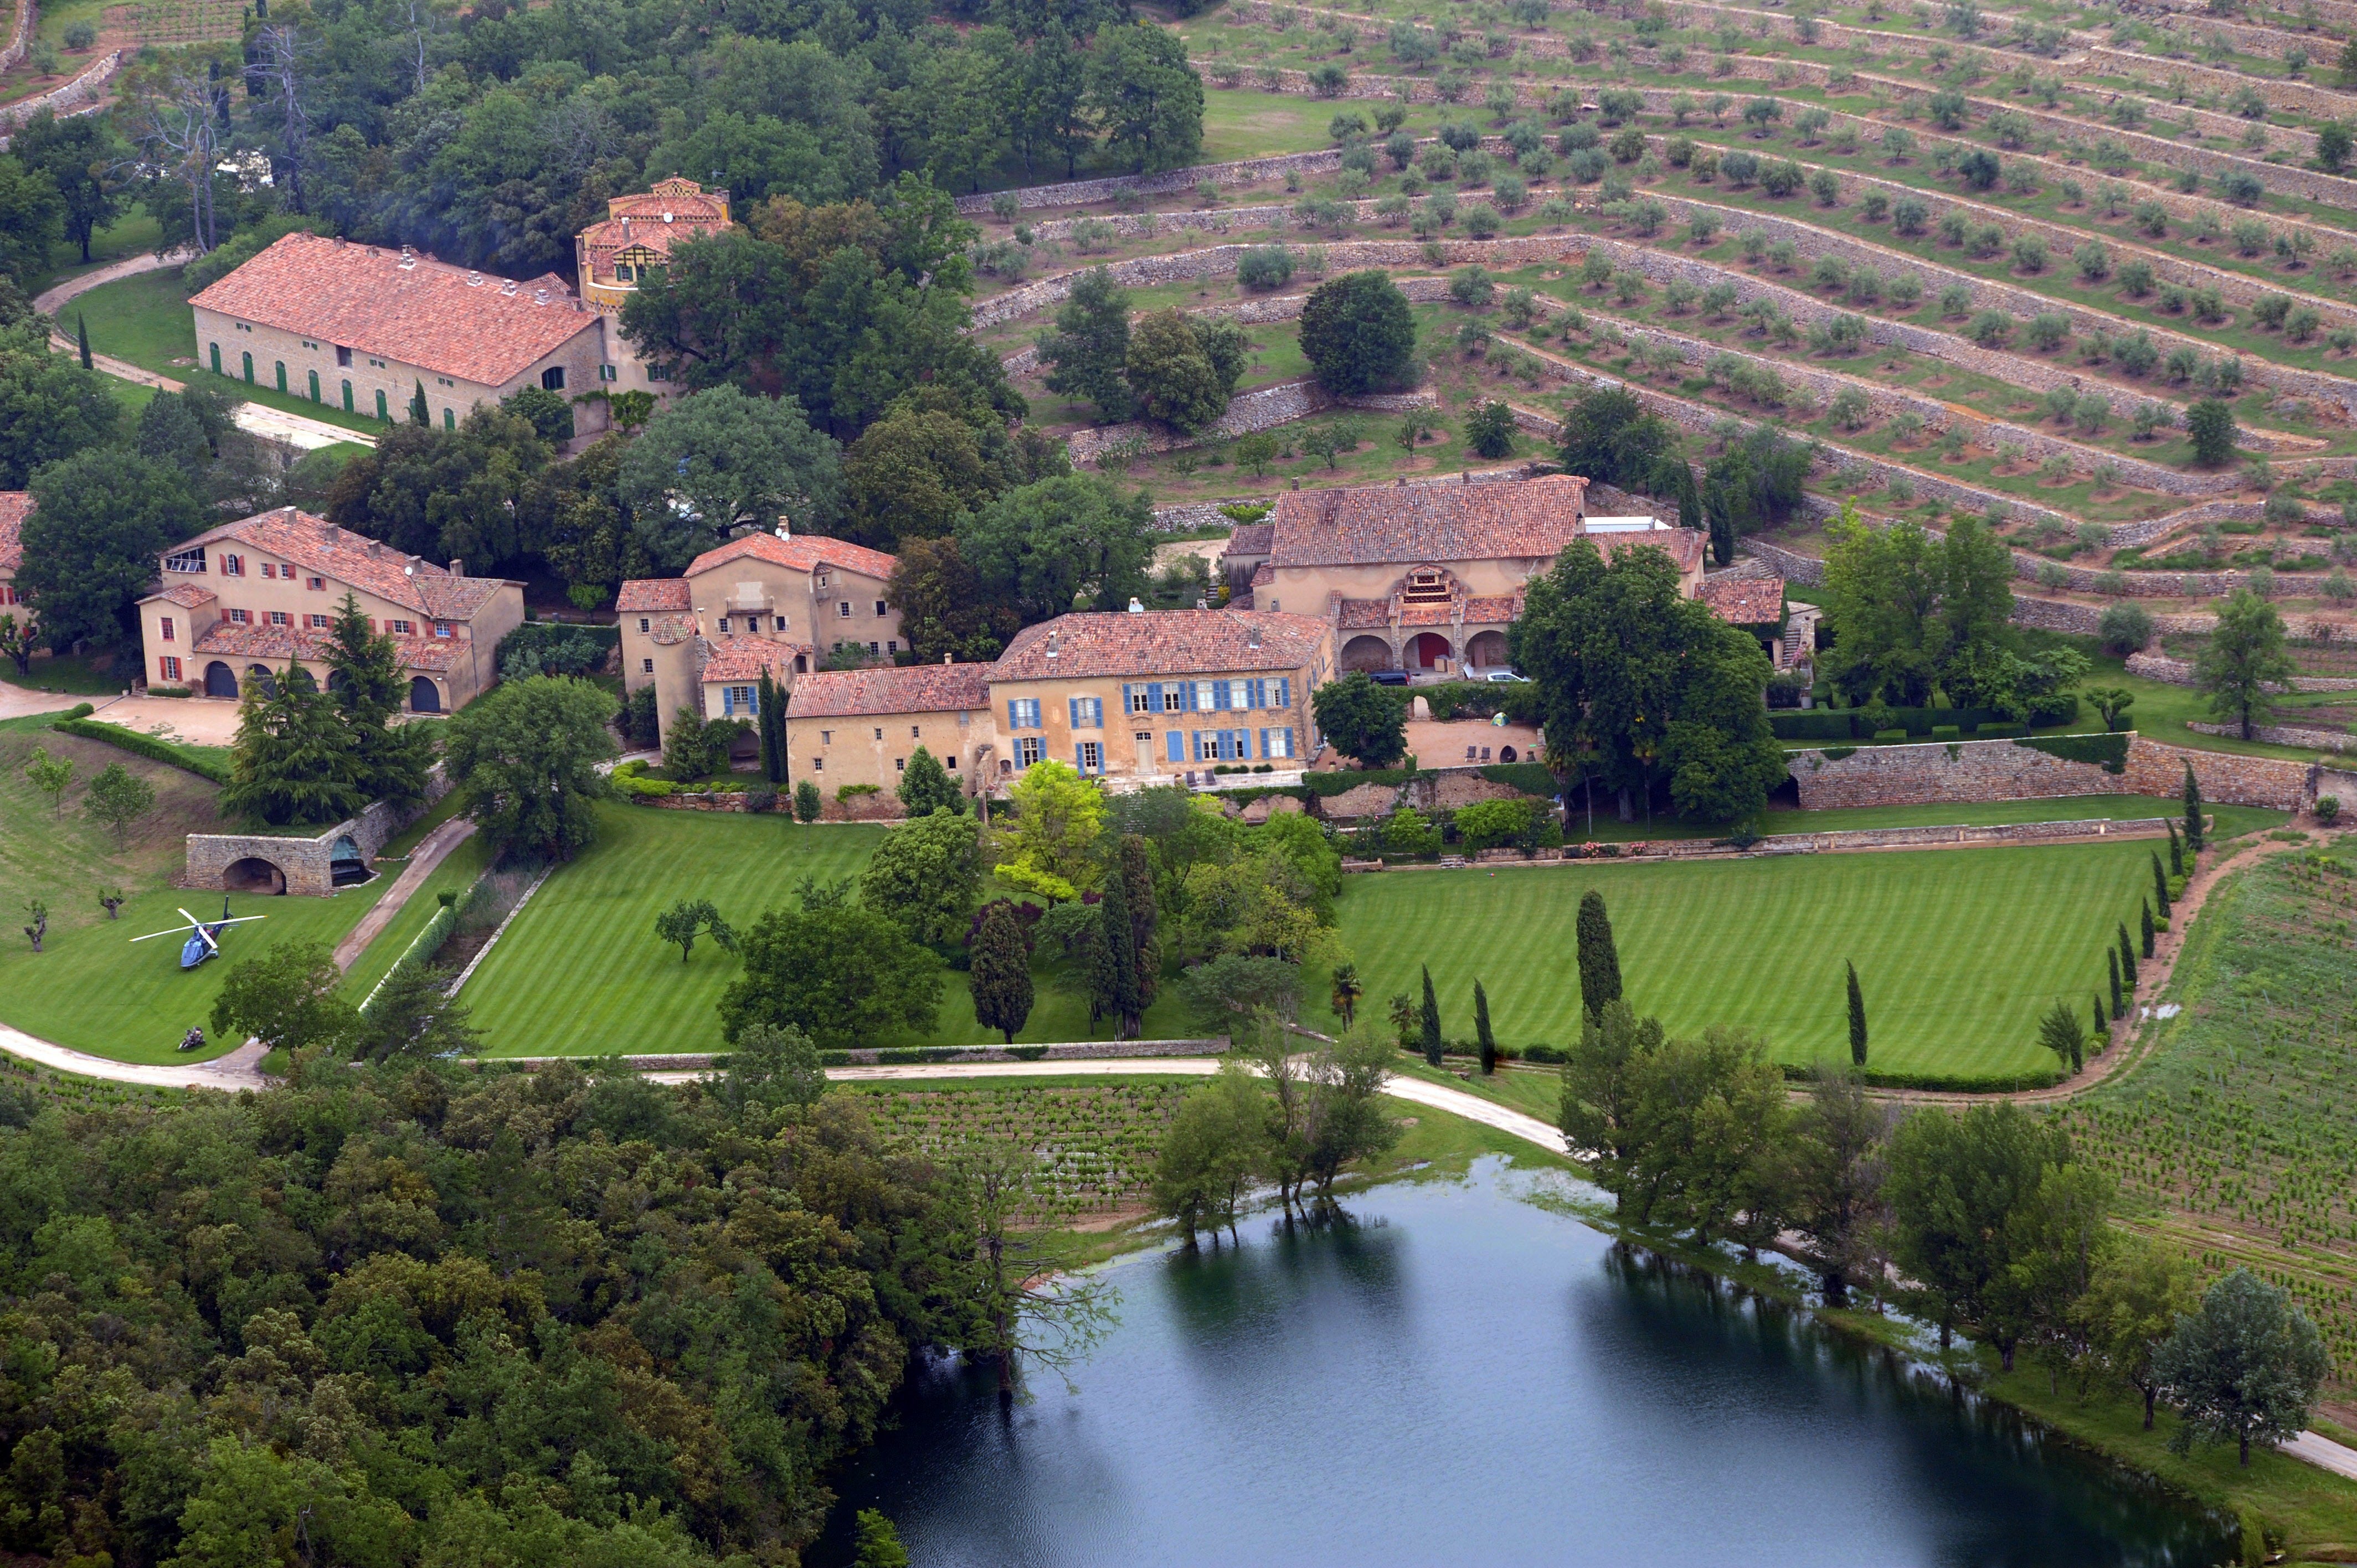 An aerial view of the Château Miraval estate